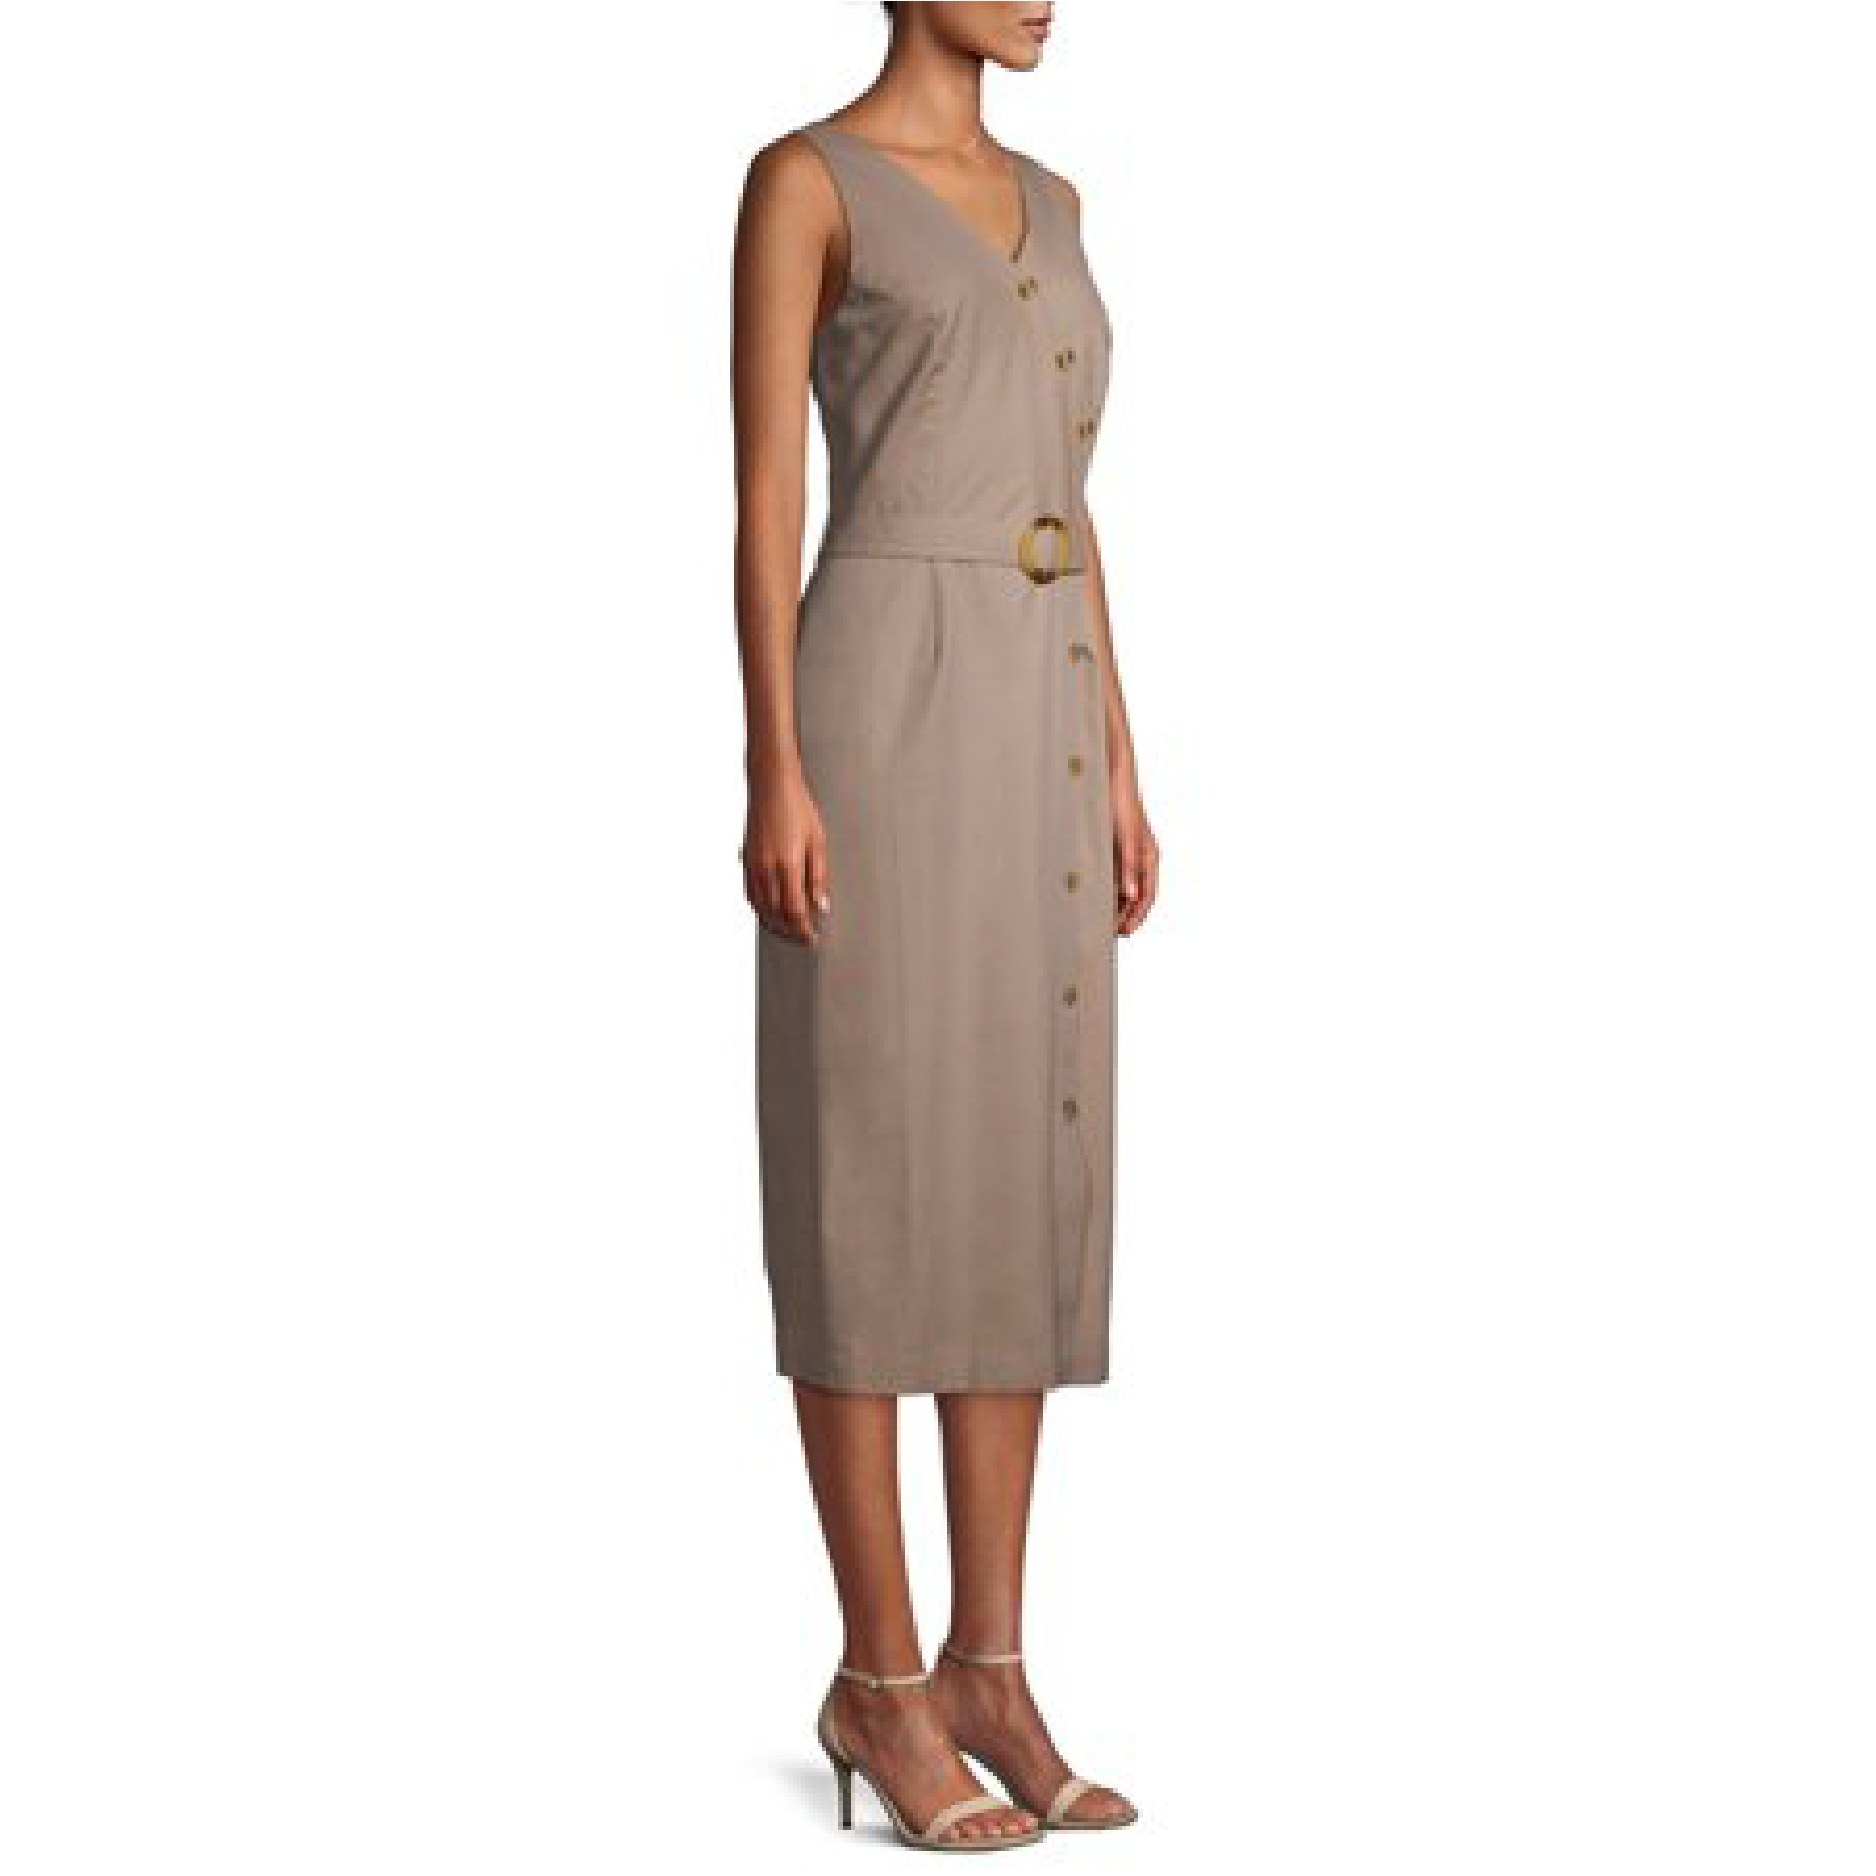 The brown midi dress with brown button-down design and belt